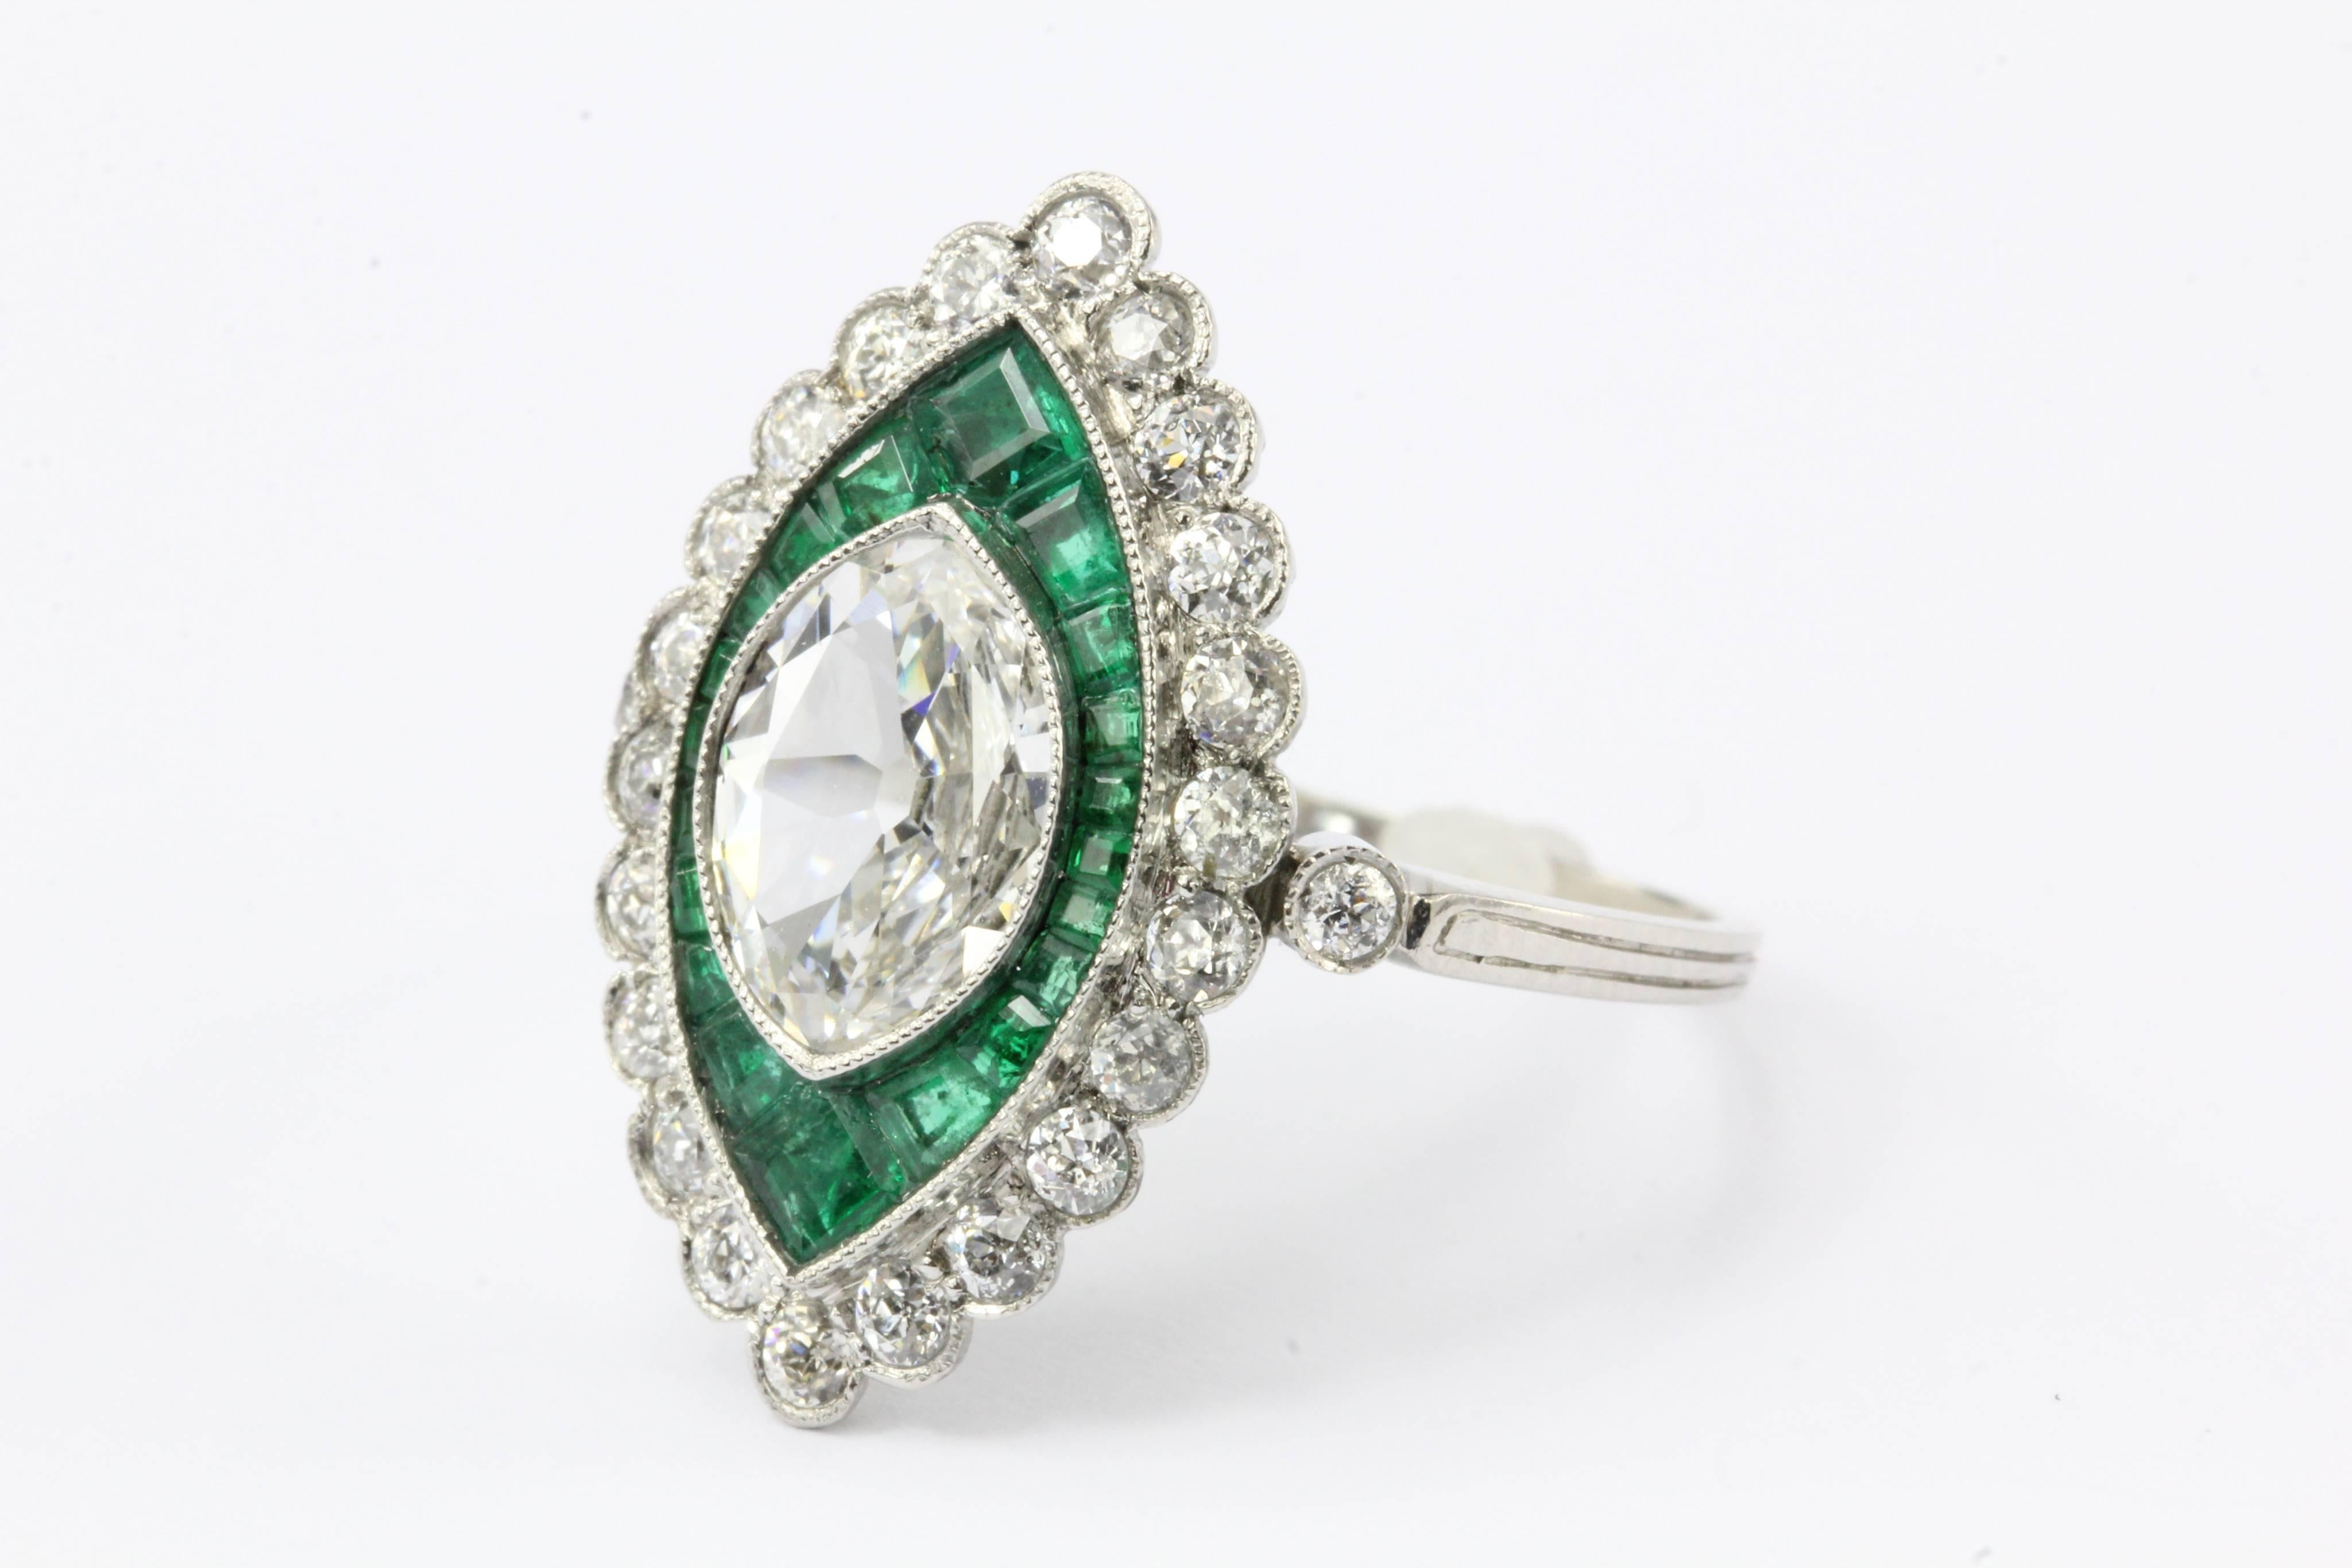  Platinum 1.05 Carat Moval Diamond & Emerald Halo Engagement Ring

This 1.05 carat Moval cut diamond lies as comfortably between its frame of emeralds as a summer rain drop rests upon a lush green rose leaf. The center 1.05 carat Moval cut